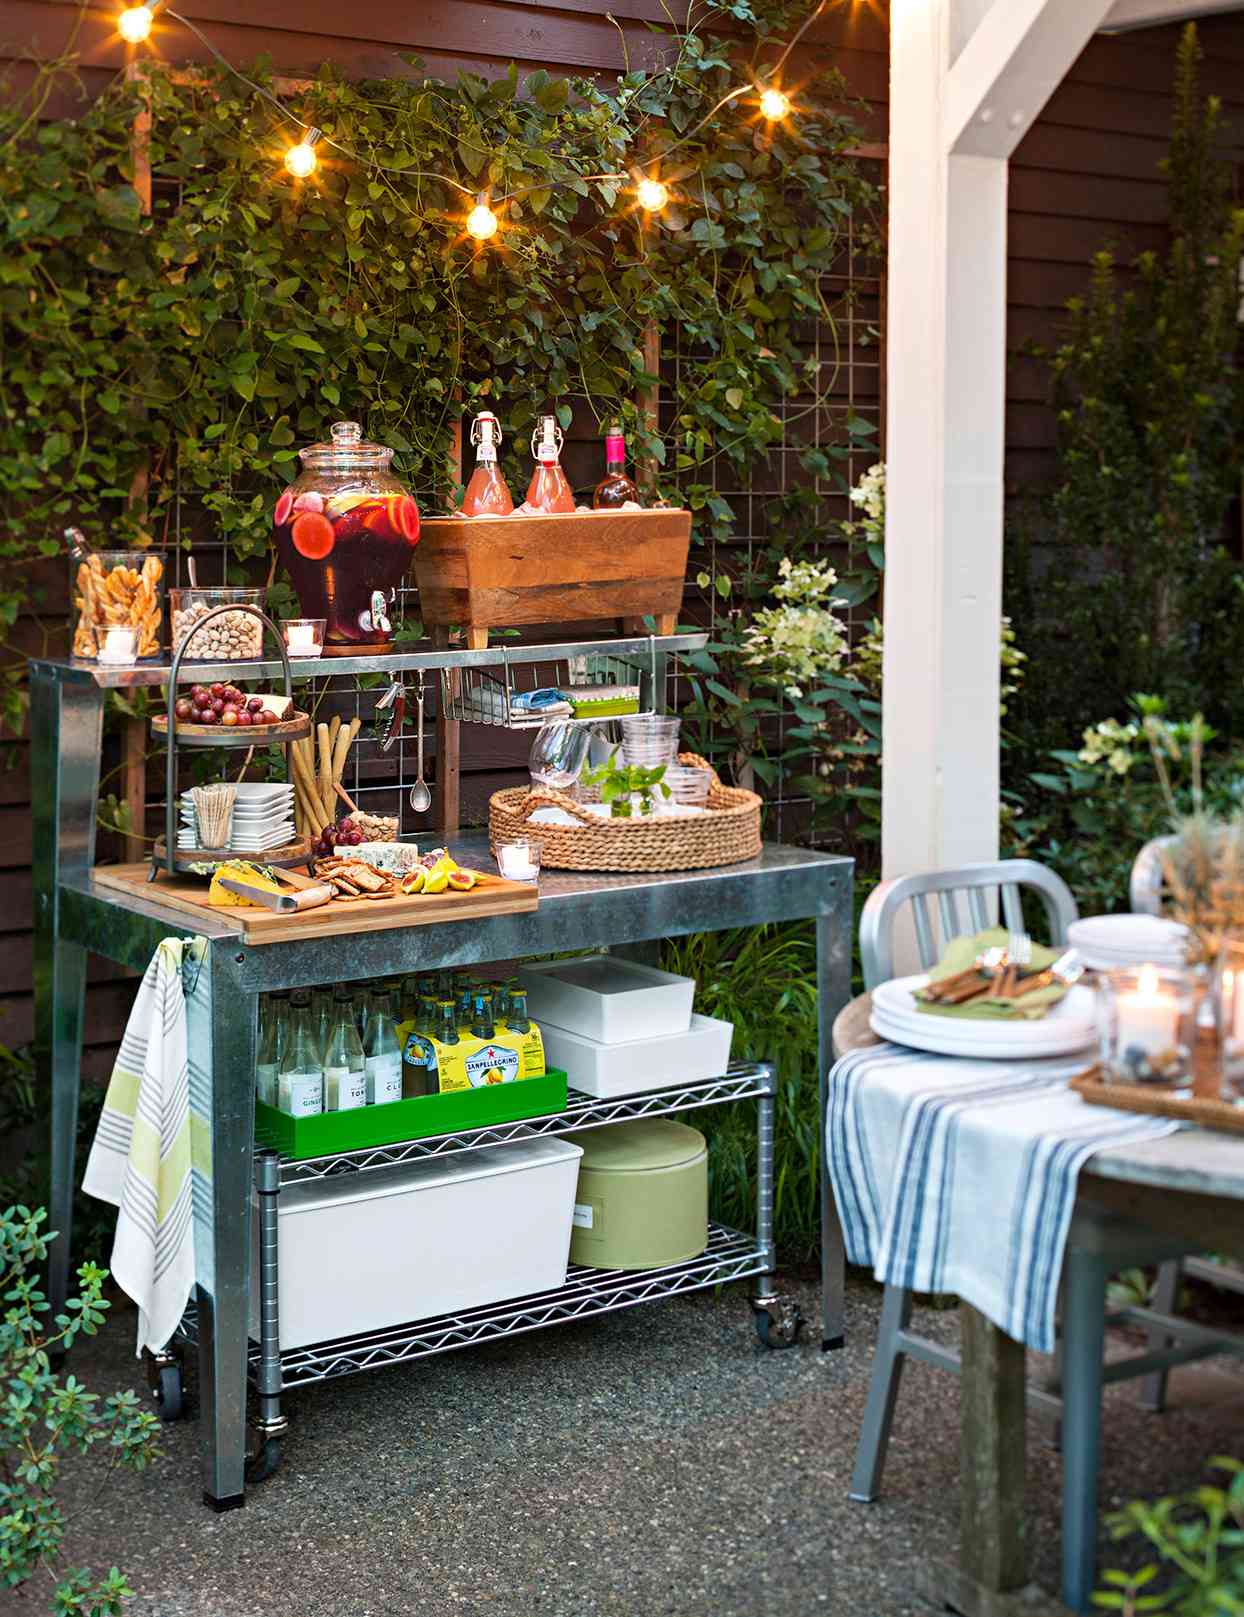 5 Clever Tips for Repurposing a Potting Bench as a Bar Cart